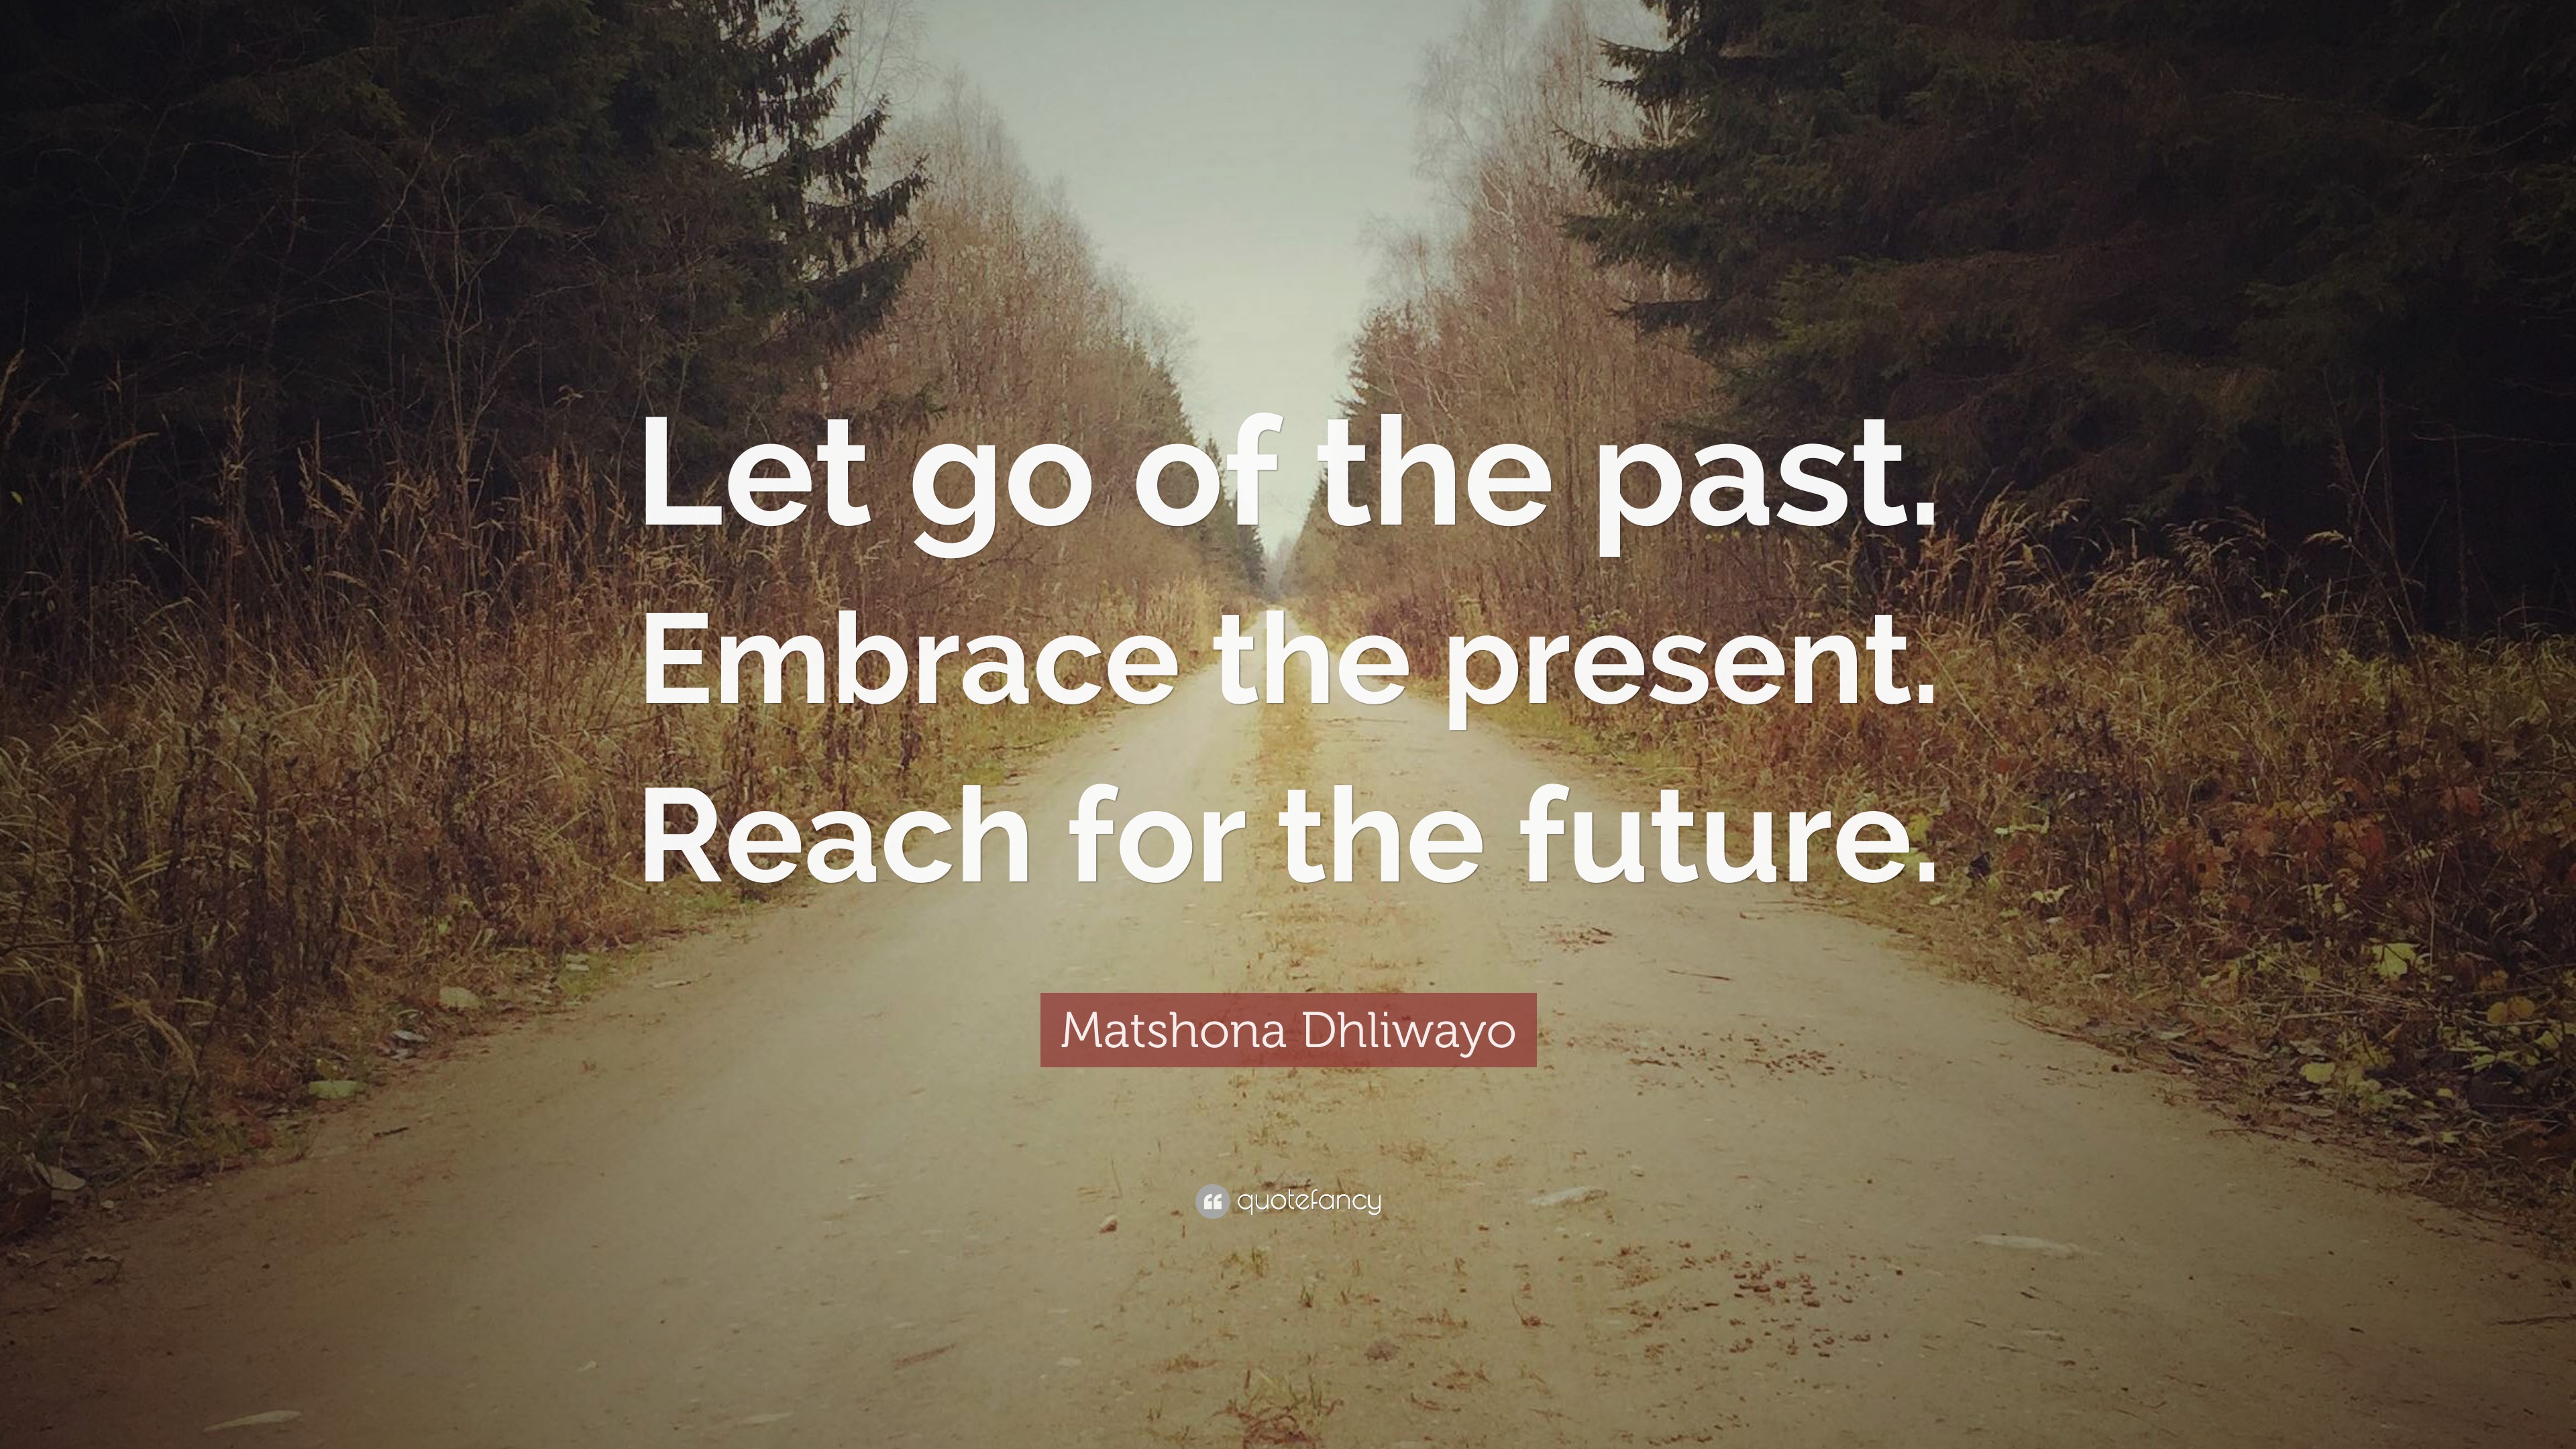 Matshona Dhliwayo Quote: “Let go of the past. Embrace the present ...